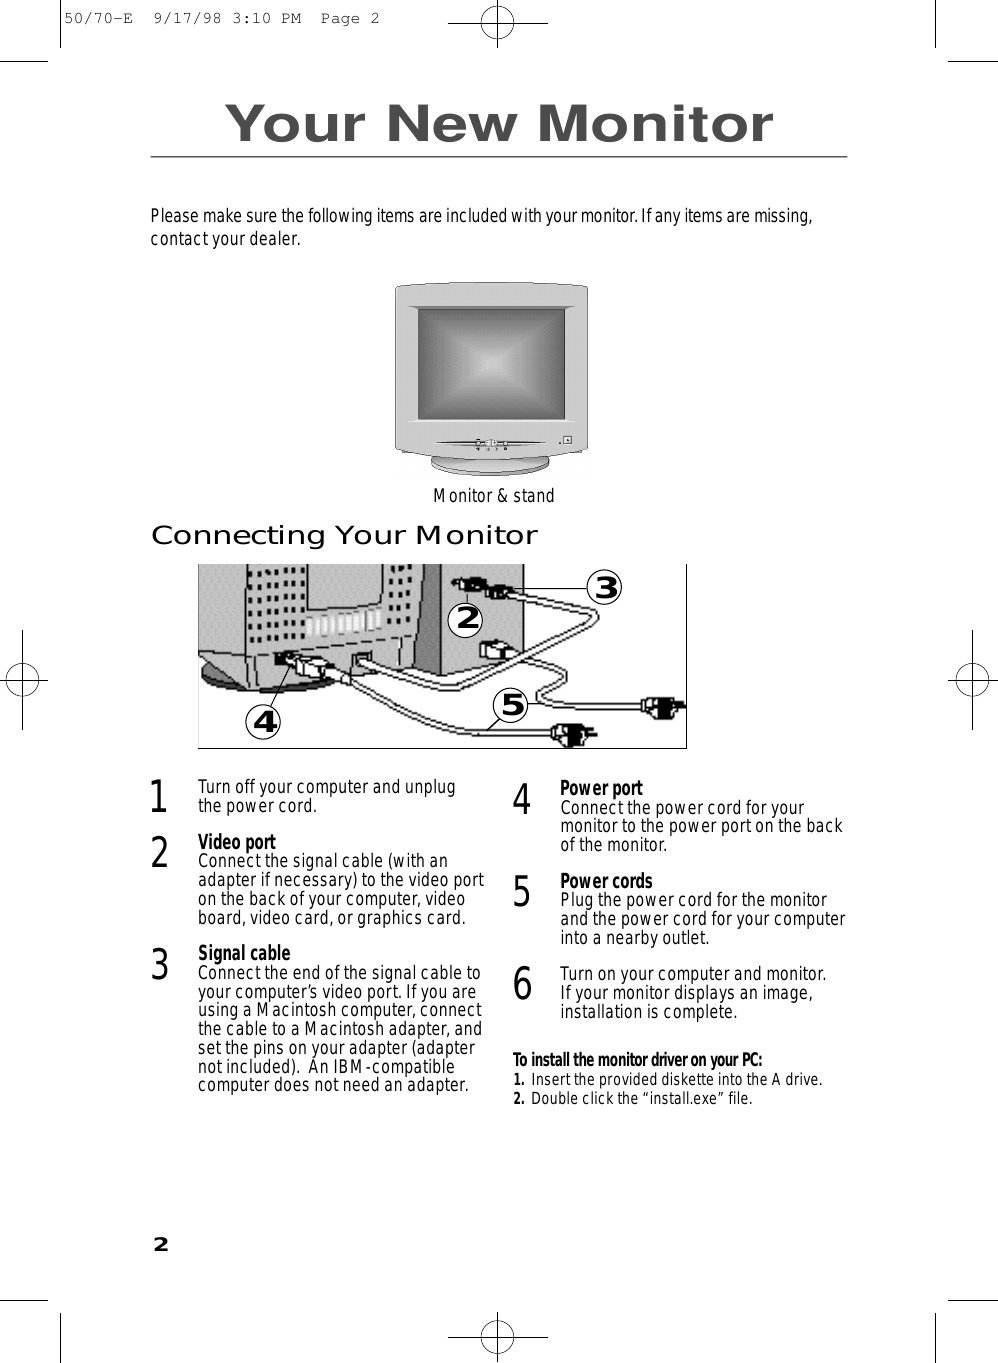 23Your New Monitor4531Turn off your computer and unplugthe power cord.2Video portConnect the signal cable (with anadapter if necessary) to the video porton the back of your computer, videoboard, video card, or graphics card.3Signal cableConnect the end of the signal cable toyour computer’s video port. If you areusing a Macintosh computer, connectthe cable to a Macintosh adapter, andset the pins on your adapter (adapternot included).  An IBM-compatiblecomputer does not need an adapter.4Power portConnect the power cord for yourmonitor to the power port on the backof the monitor.5Power cordsPlug the power cord for the monitorand the power cord for your computerinto a nearby outlet.6Turn on your computer and monitor. If your monitor displays an image,installation is complete.To install the monitor driver on your PC:1.  Insert the provided diskette into the A drive.2.  Double click the “install.exe” file.Connecting Your MonitorPlease make sure the following items are included with your monitor. If any items are missing,contact your dealer.Monitor &amp; stand250/70-E  9/17/98 3:10 PM  Page 2